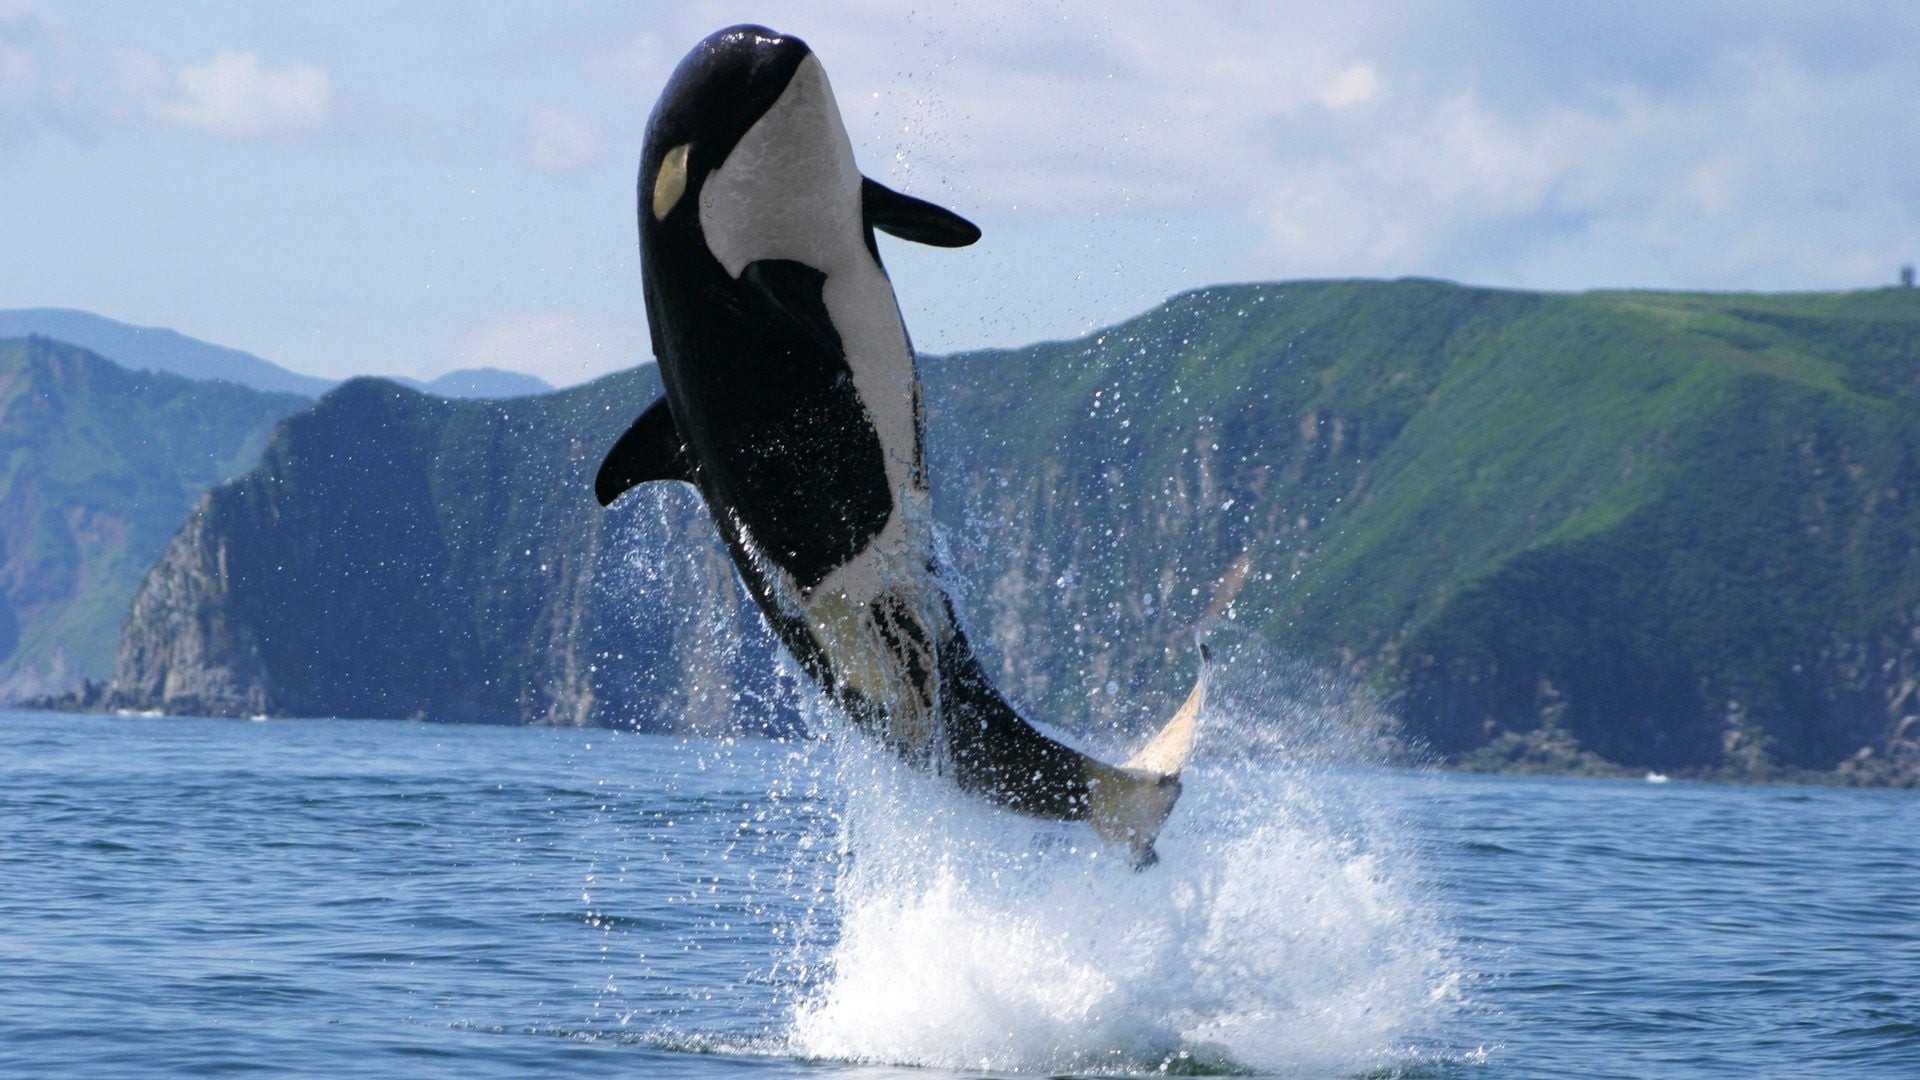 Image Of Orca Killer Whale 1920x1080